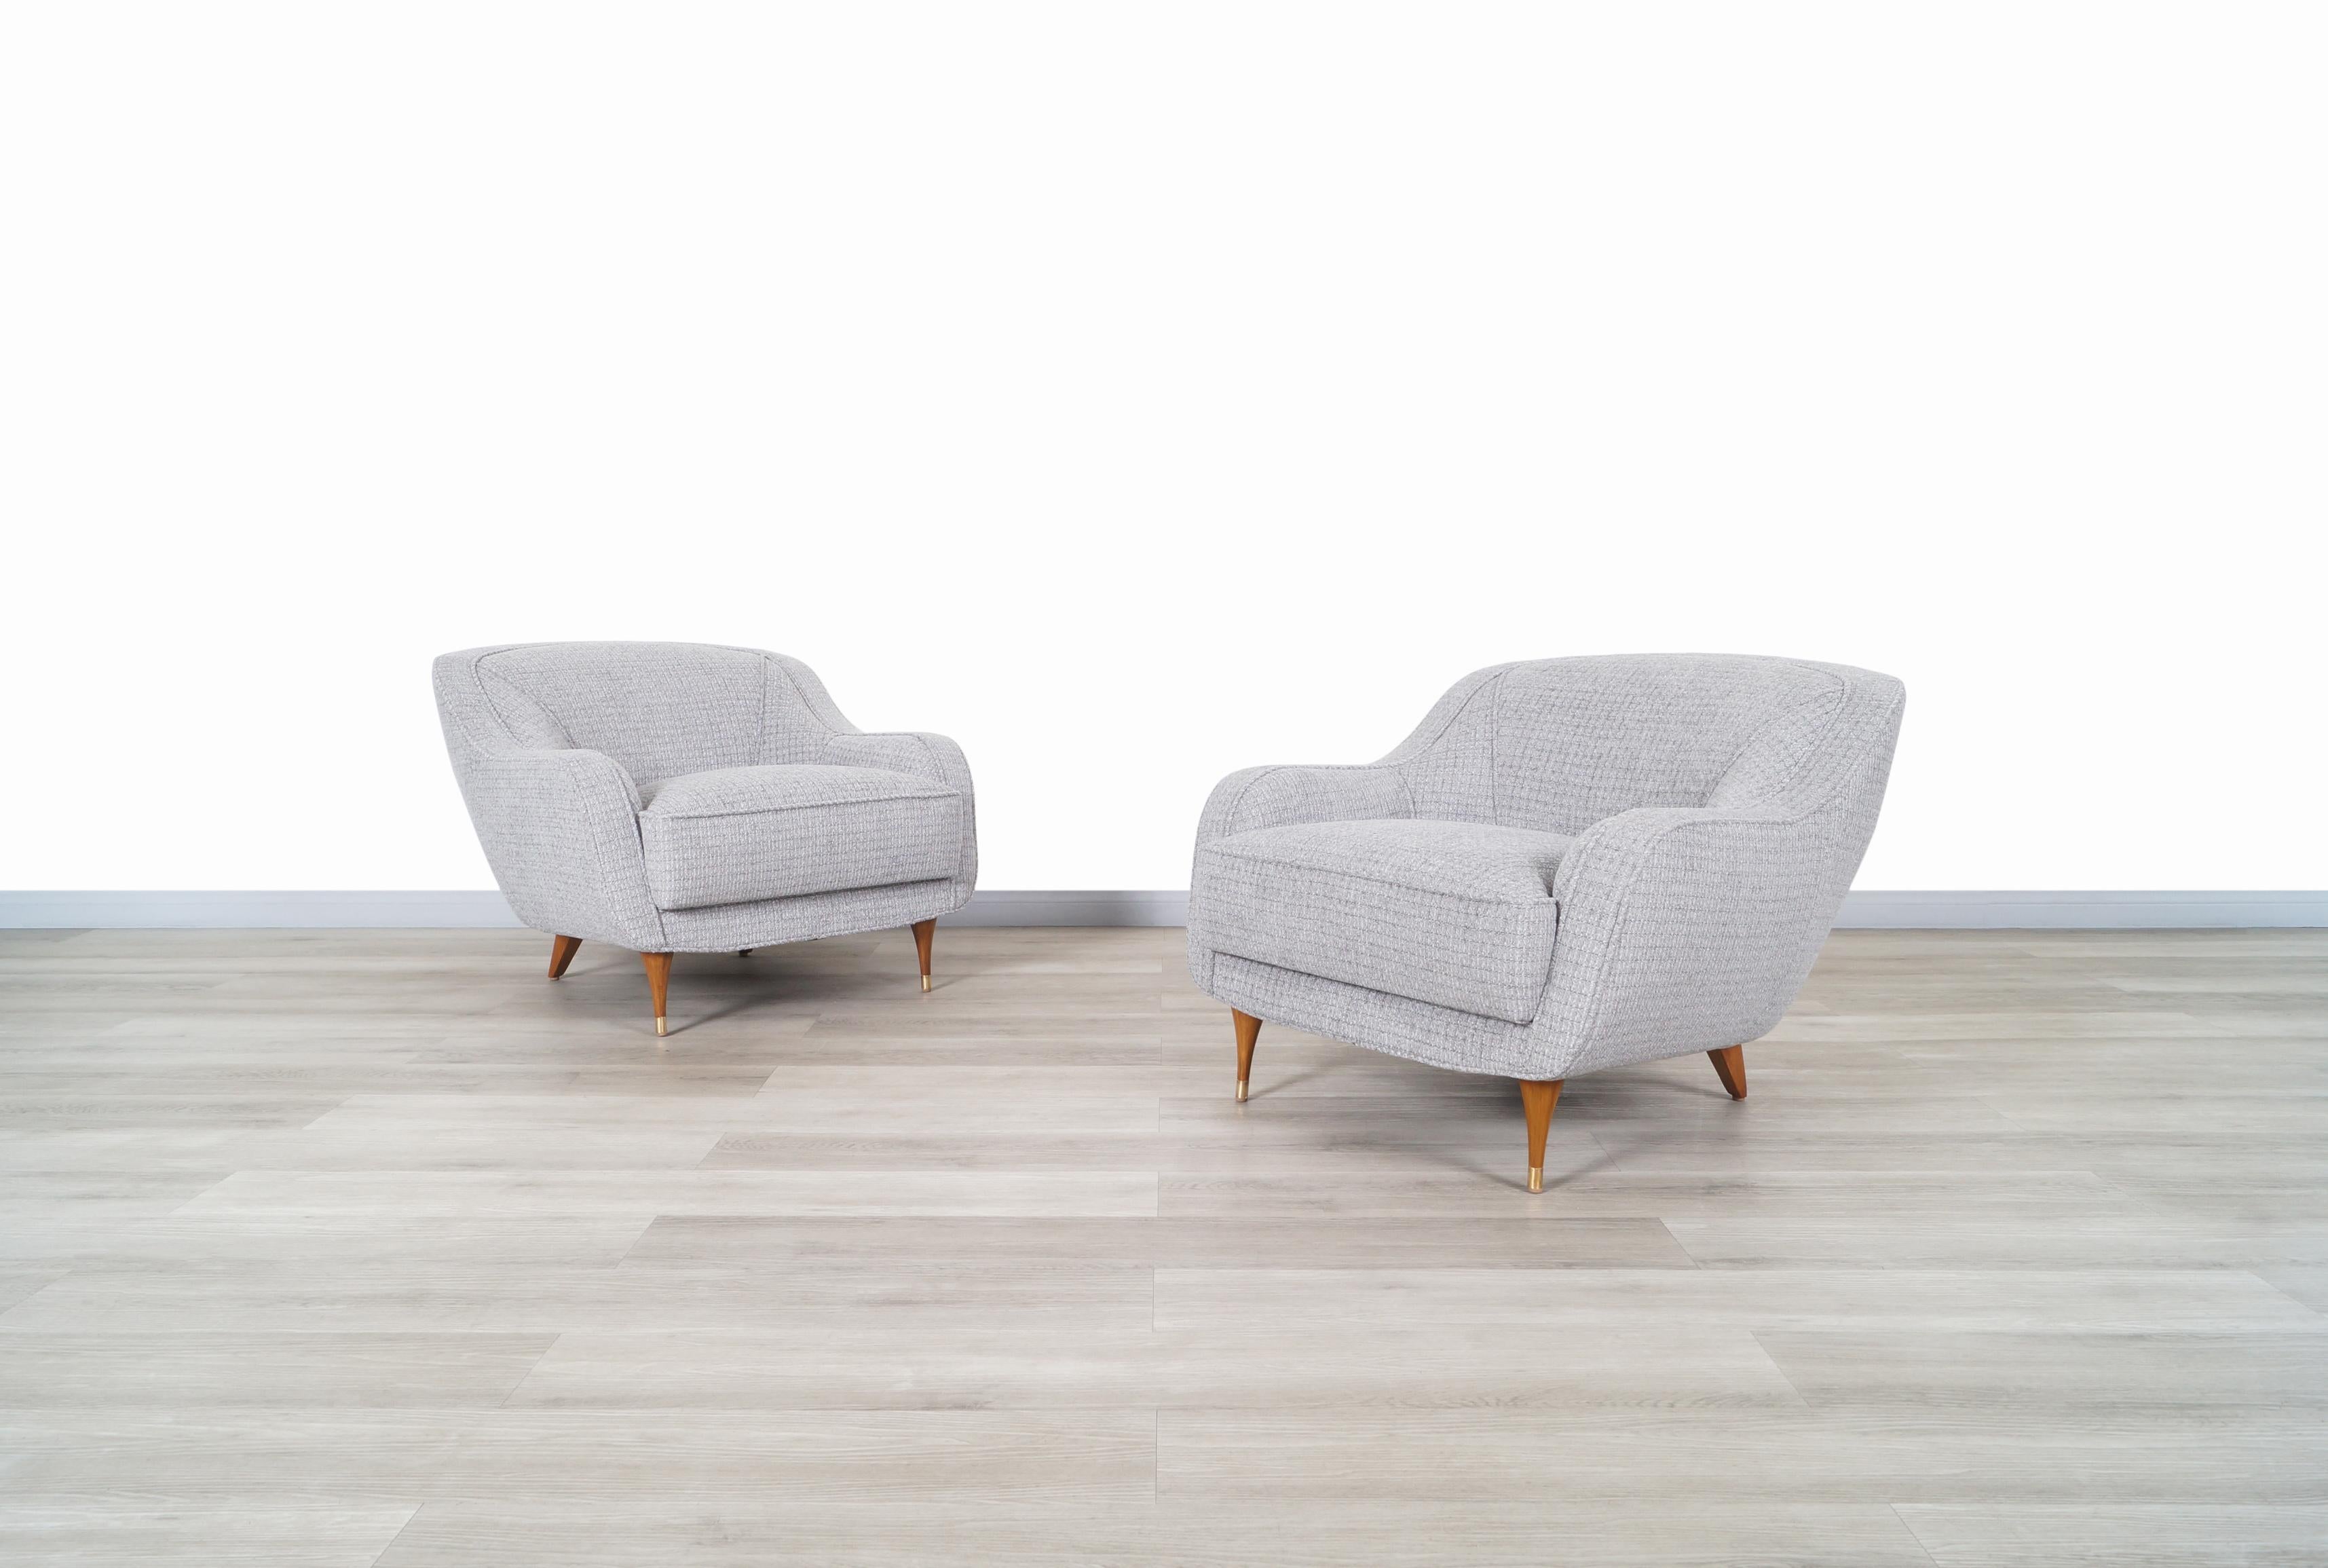 Exceptional vintage Italian “Barrel” lounge chairs designed and manufactured in Italy, circa 1950s. This pair of chairs stands out for its unusual style reflected in the circular shape design. Features comfortable cushions on the top that have been